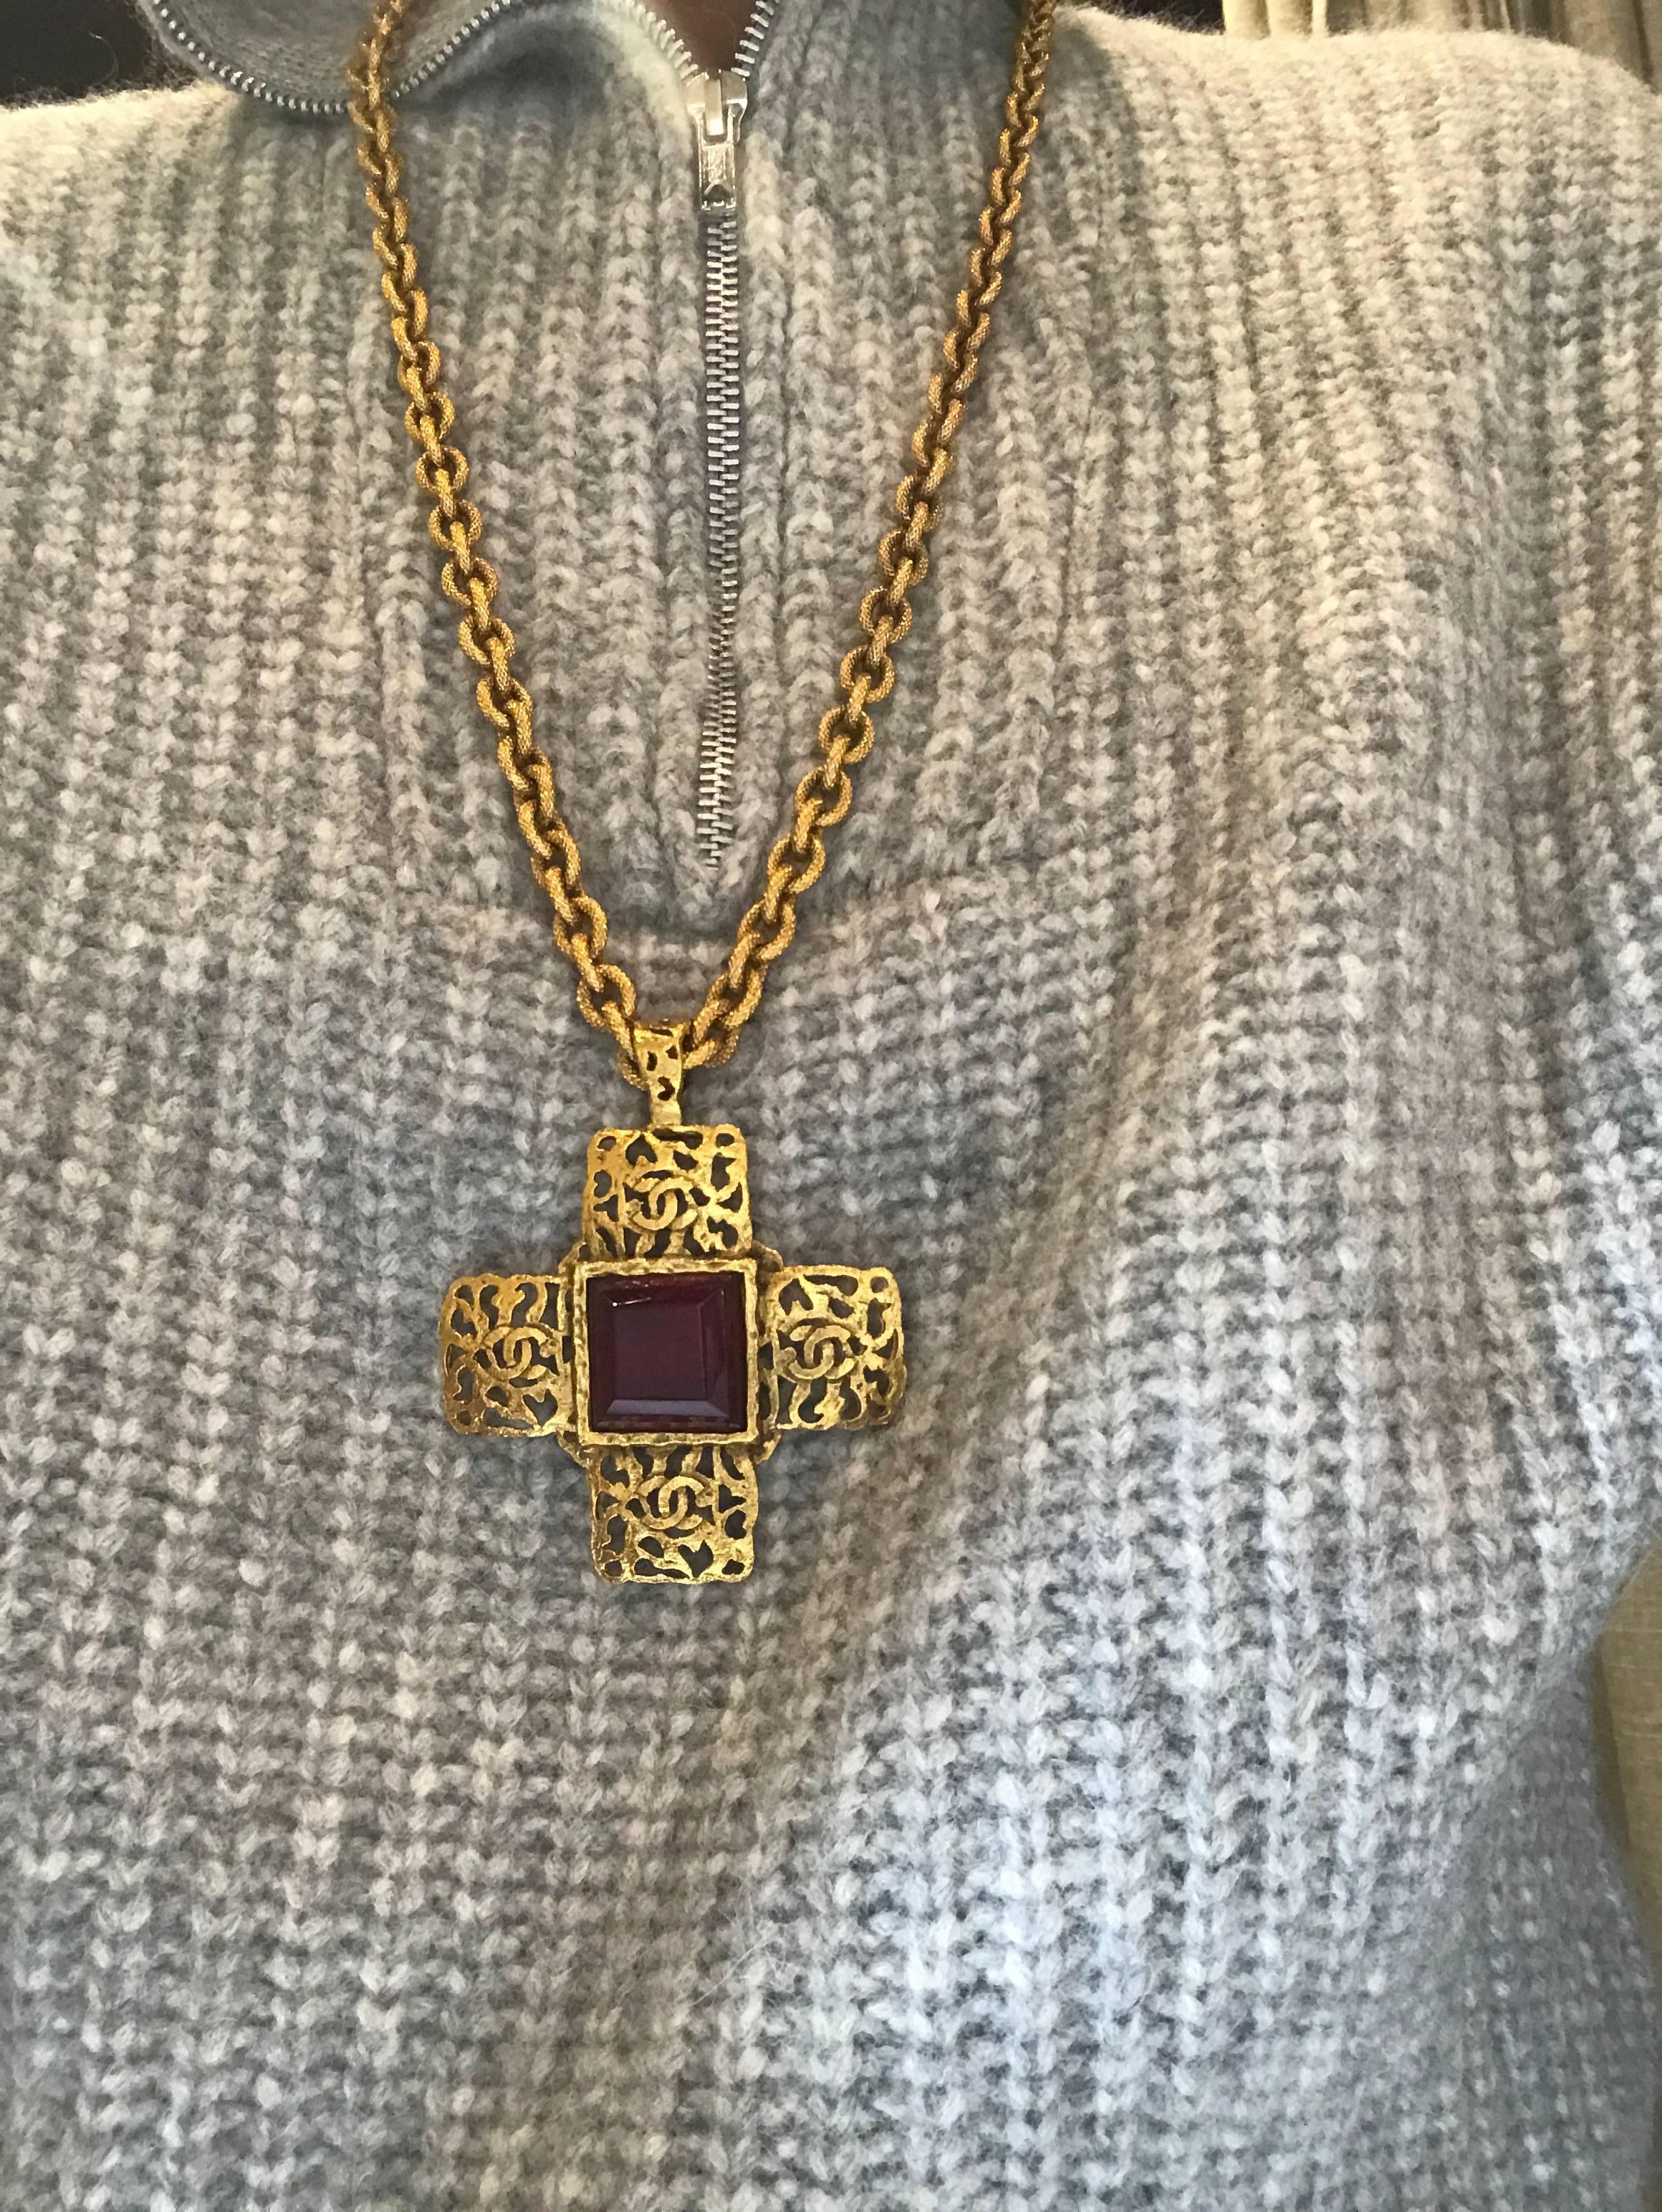 Vintage Chanel (Collection 25)  Cross Pendant Necklace. Red Gripoix. Mixed Metals/gold plated. 
Chain: 80 cm.
Pendant: 7cm by 7cm.
Made in France .